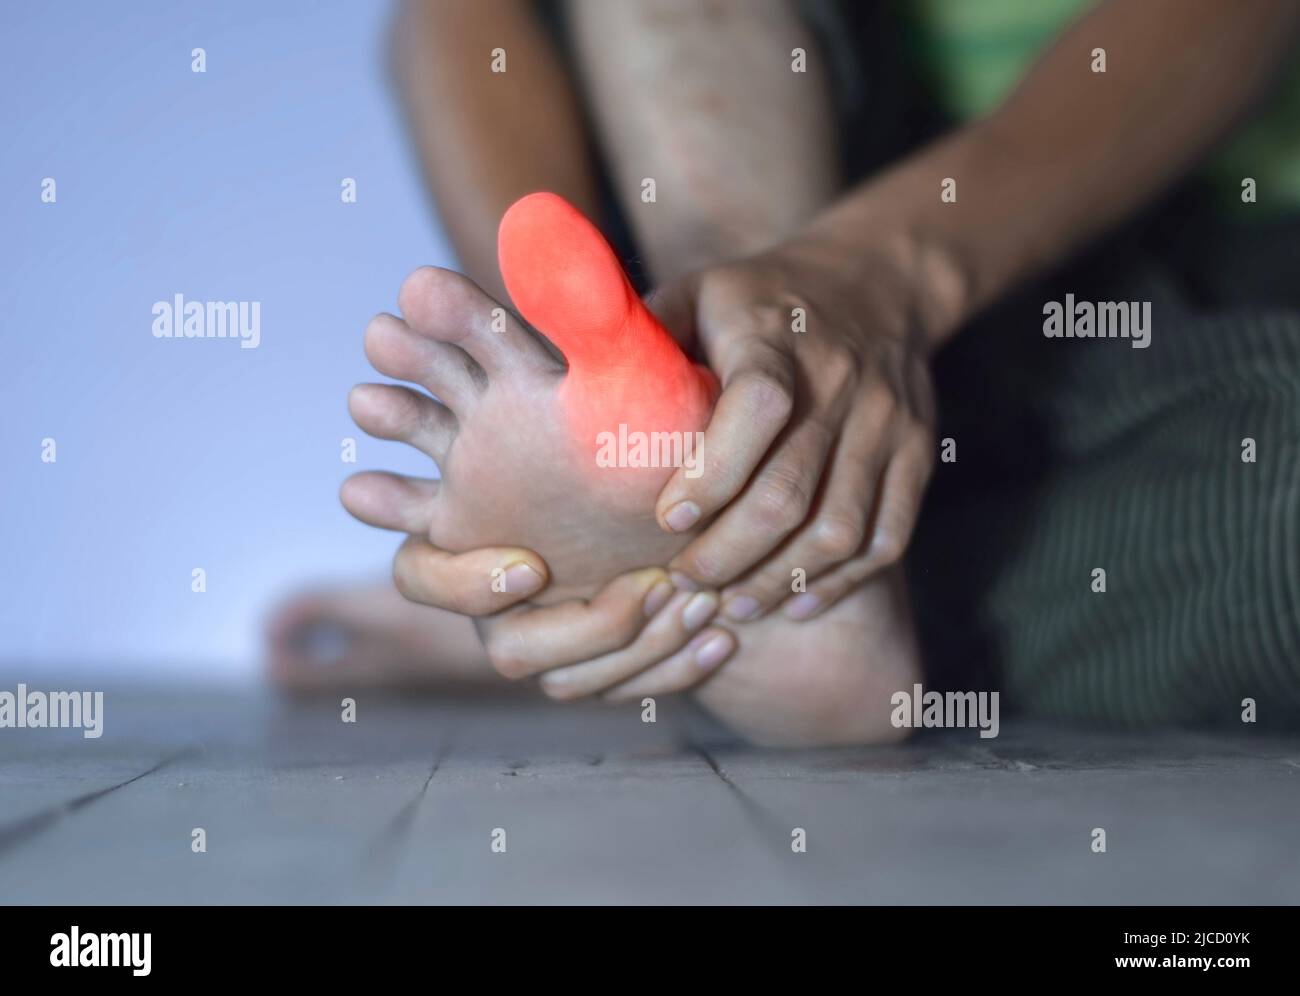 Inflammation of Asian young man’s big toe. Concept of foot joint pain, arthritis, stumble, hyperuricema or gout. Stock Photo